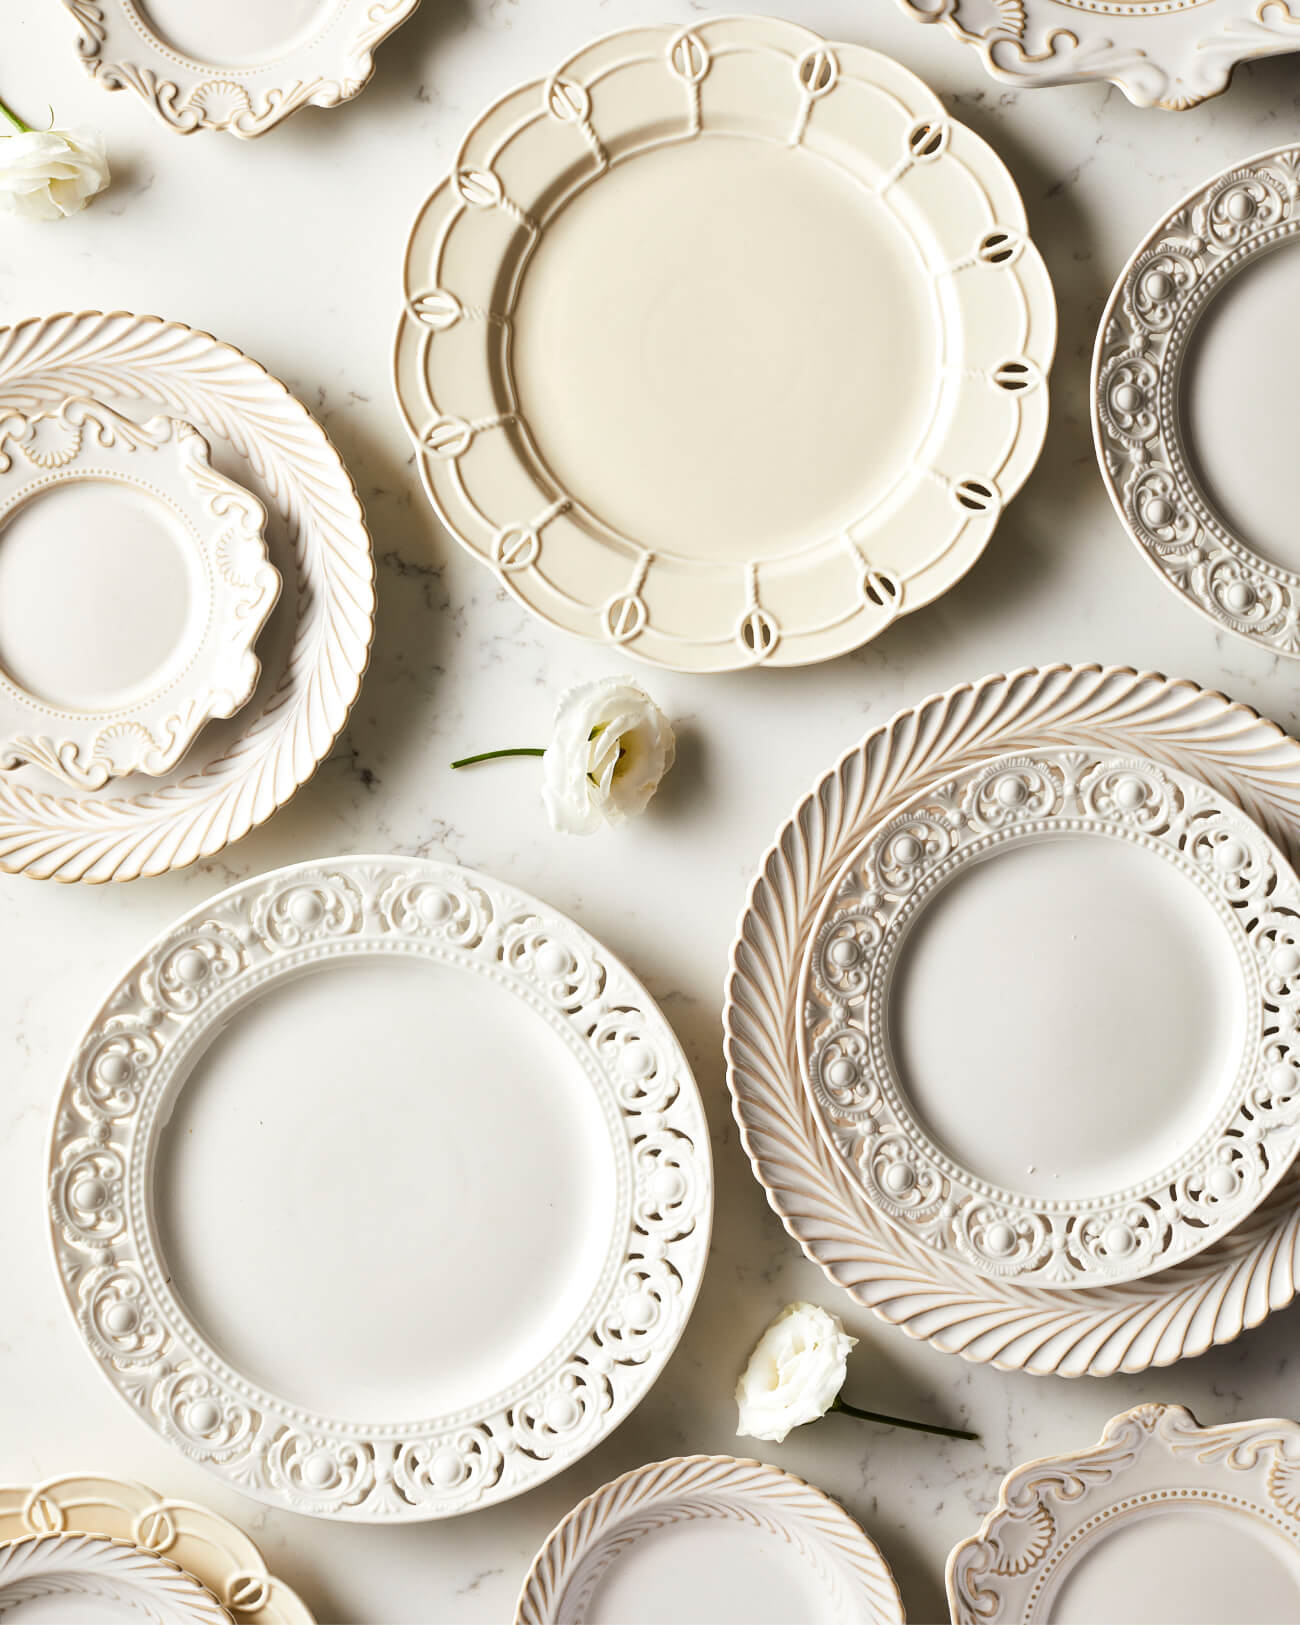 Multiple white and cream mix and match plates next to one another on a table, vintage, lace, crockery